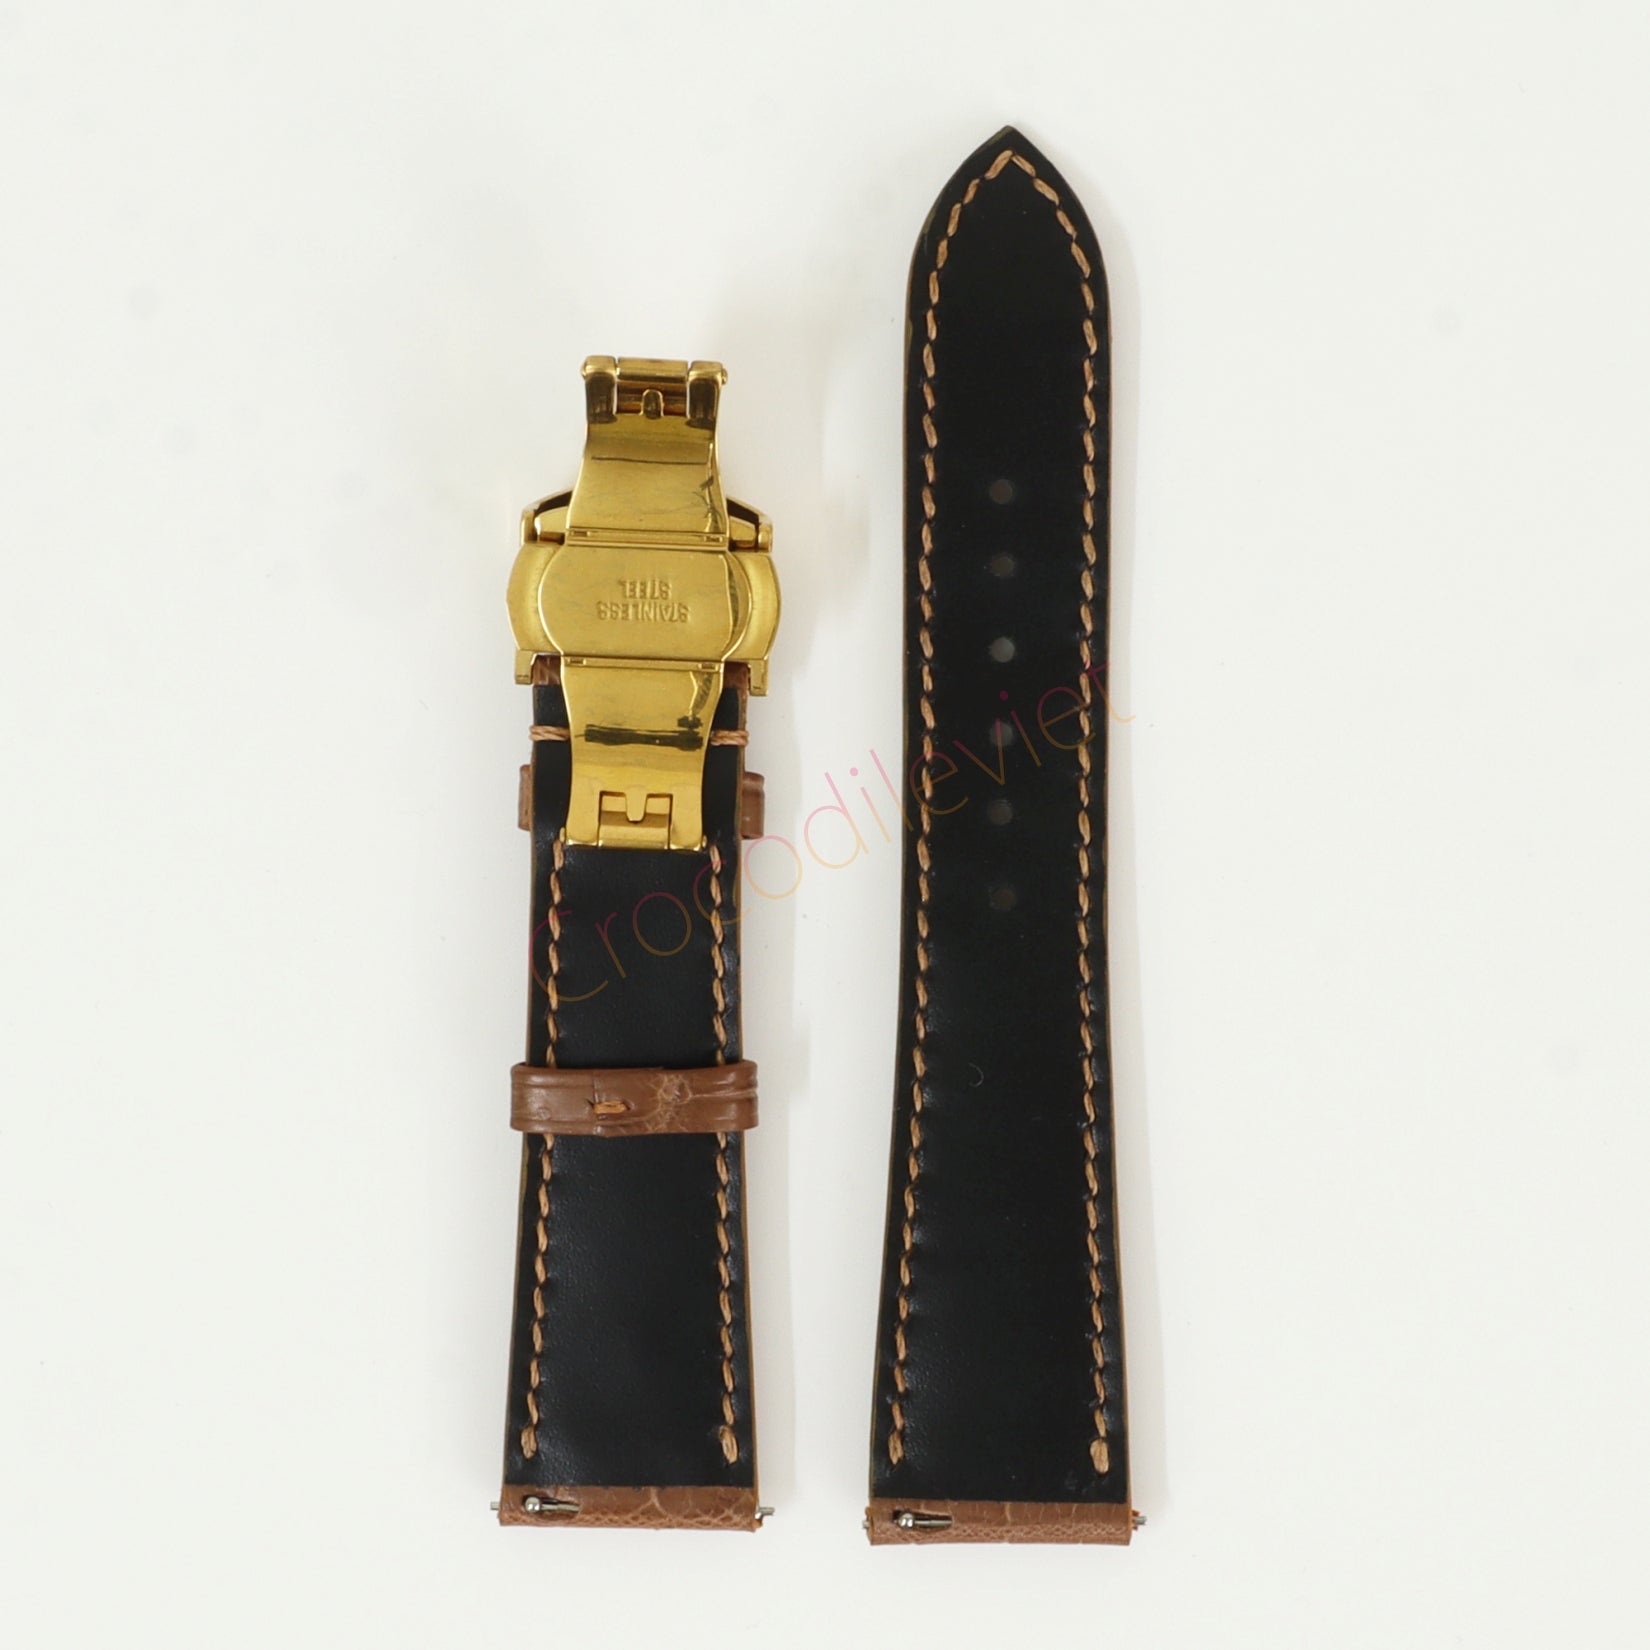 Genuine Alligator Leather Watch Straps With Deployant Clasp, Leather Watch Bands Quick Release Pins, Handmade Leather Watch Strap